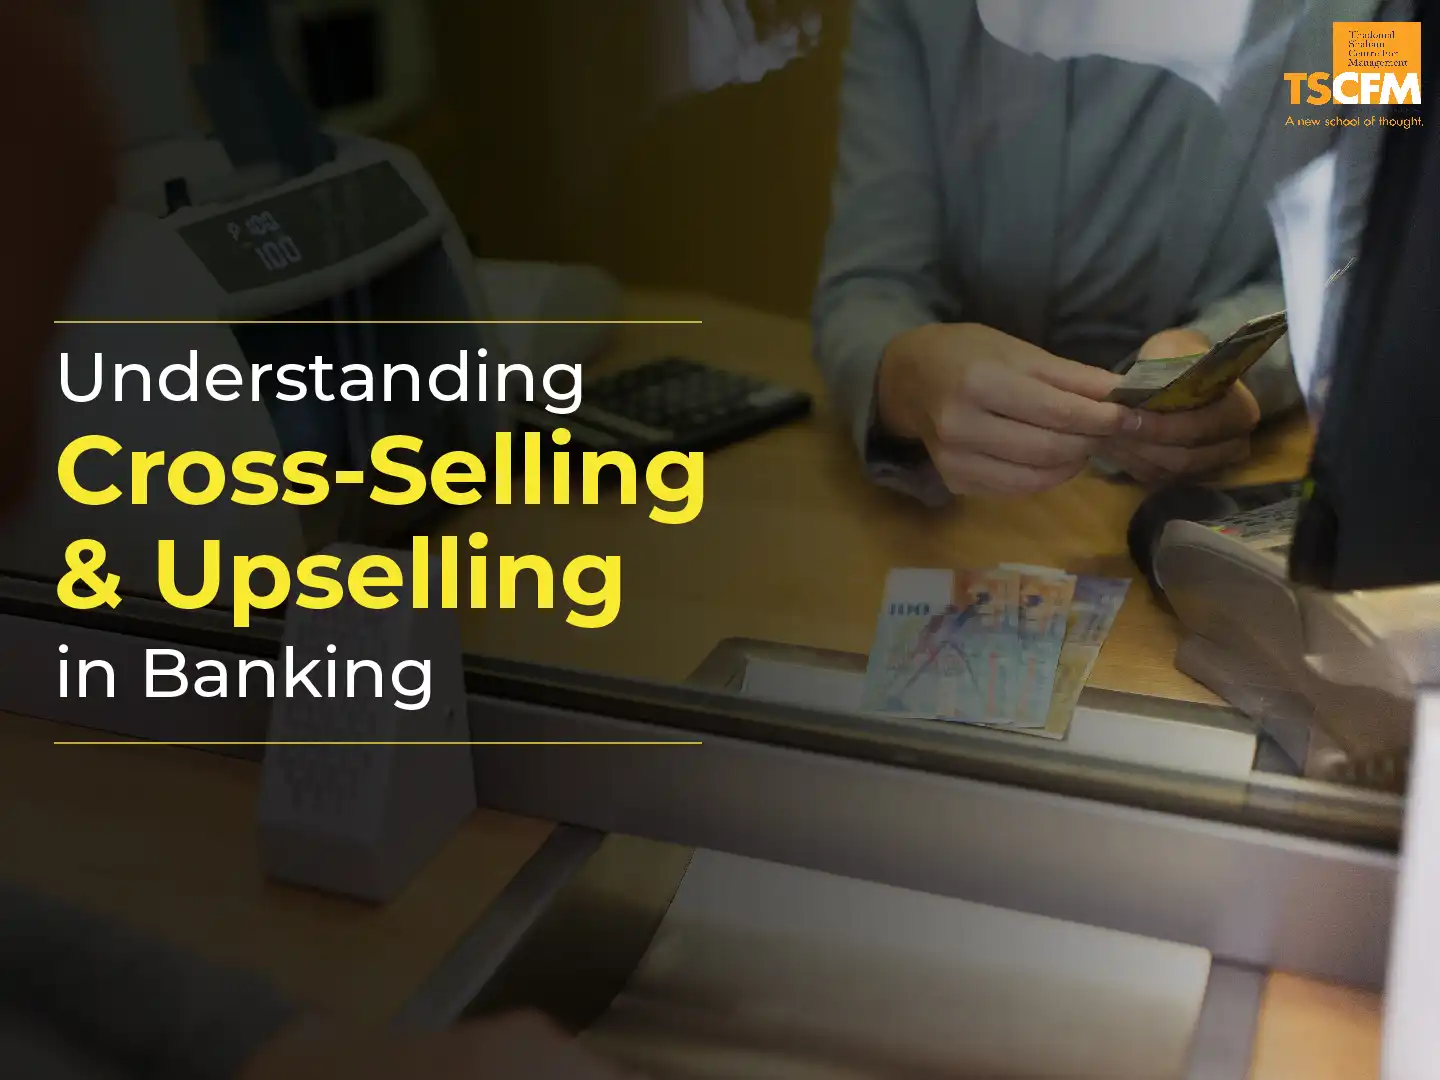 What is Cross-selling and Upselling in Banking?